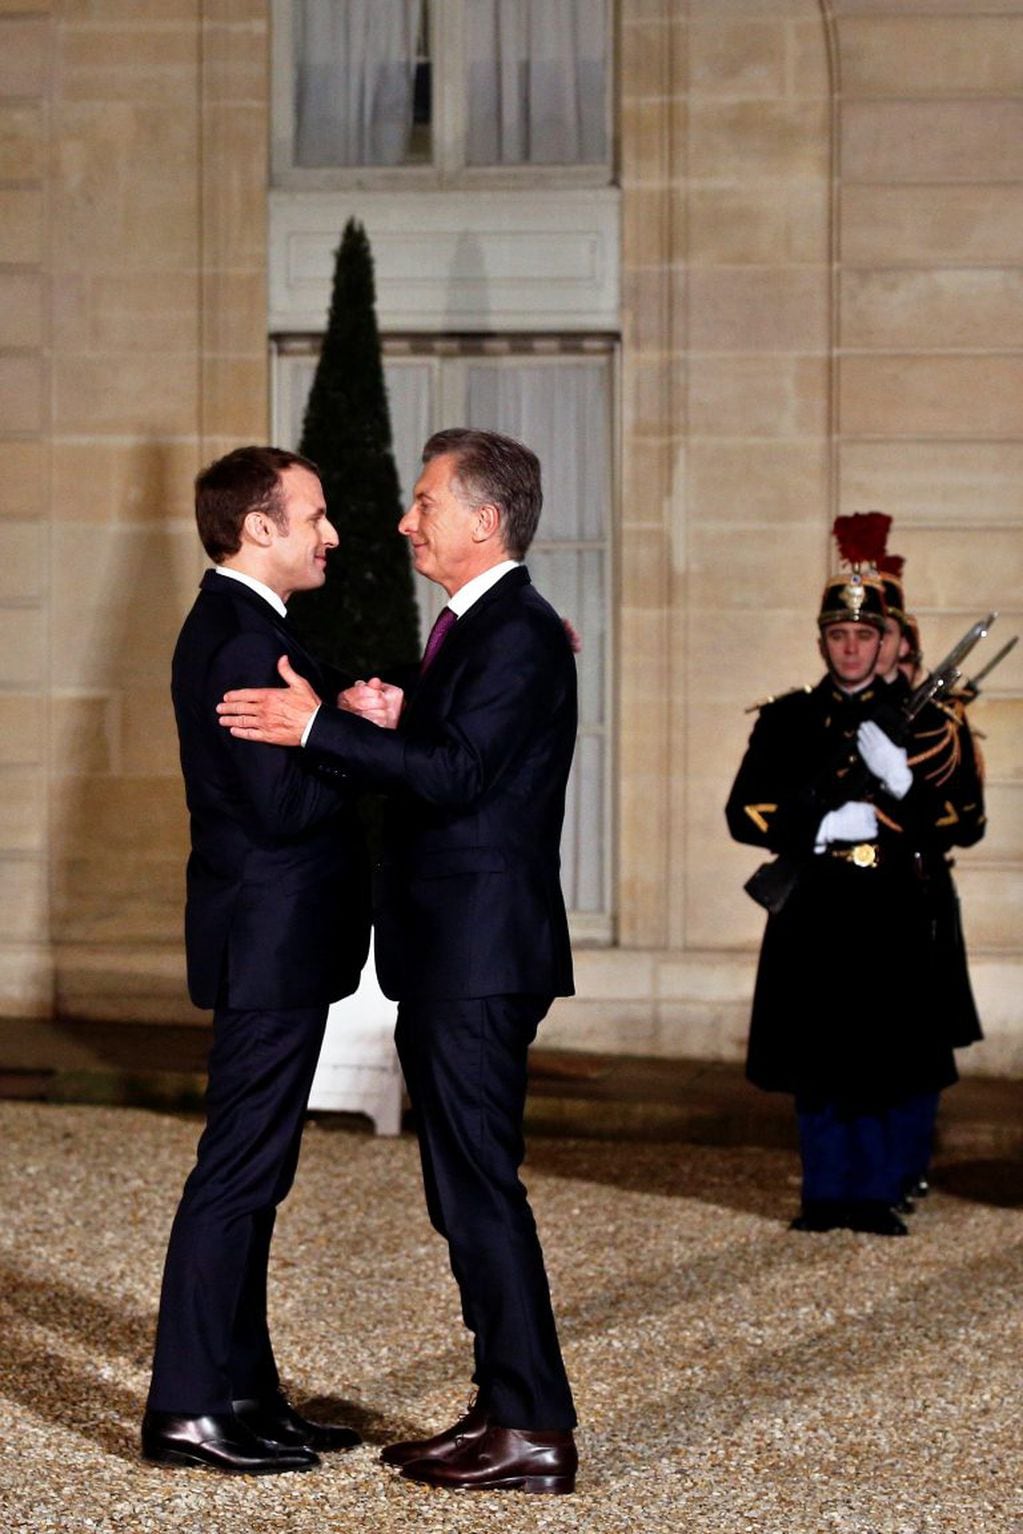 France President Emmanuel Macron, left, welcomes President of Argentina Mauricio Macri prior to a meeting, at the Elysee Palace, in Paris, Friday, Jan. 26, 2018. (AP Photo/Thibault Camus)